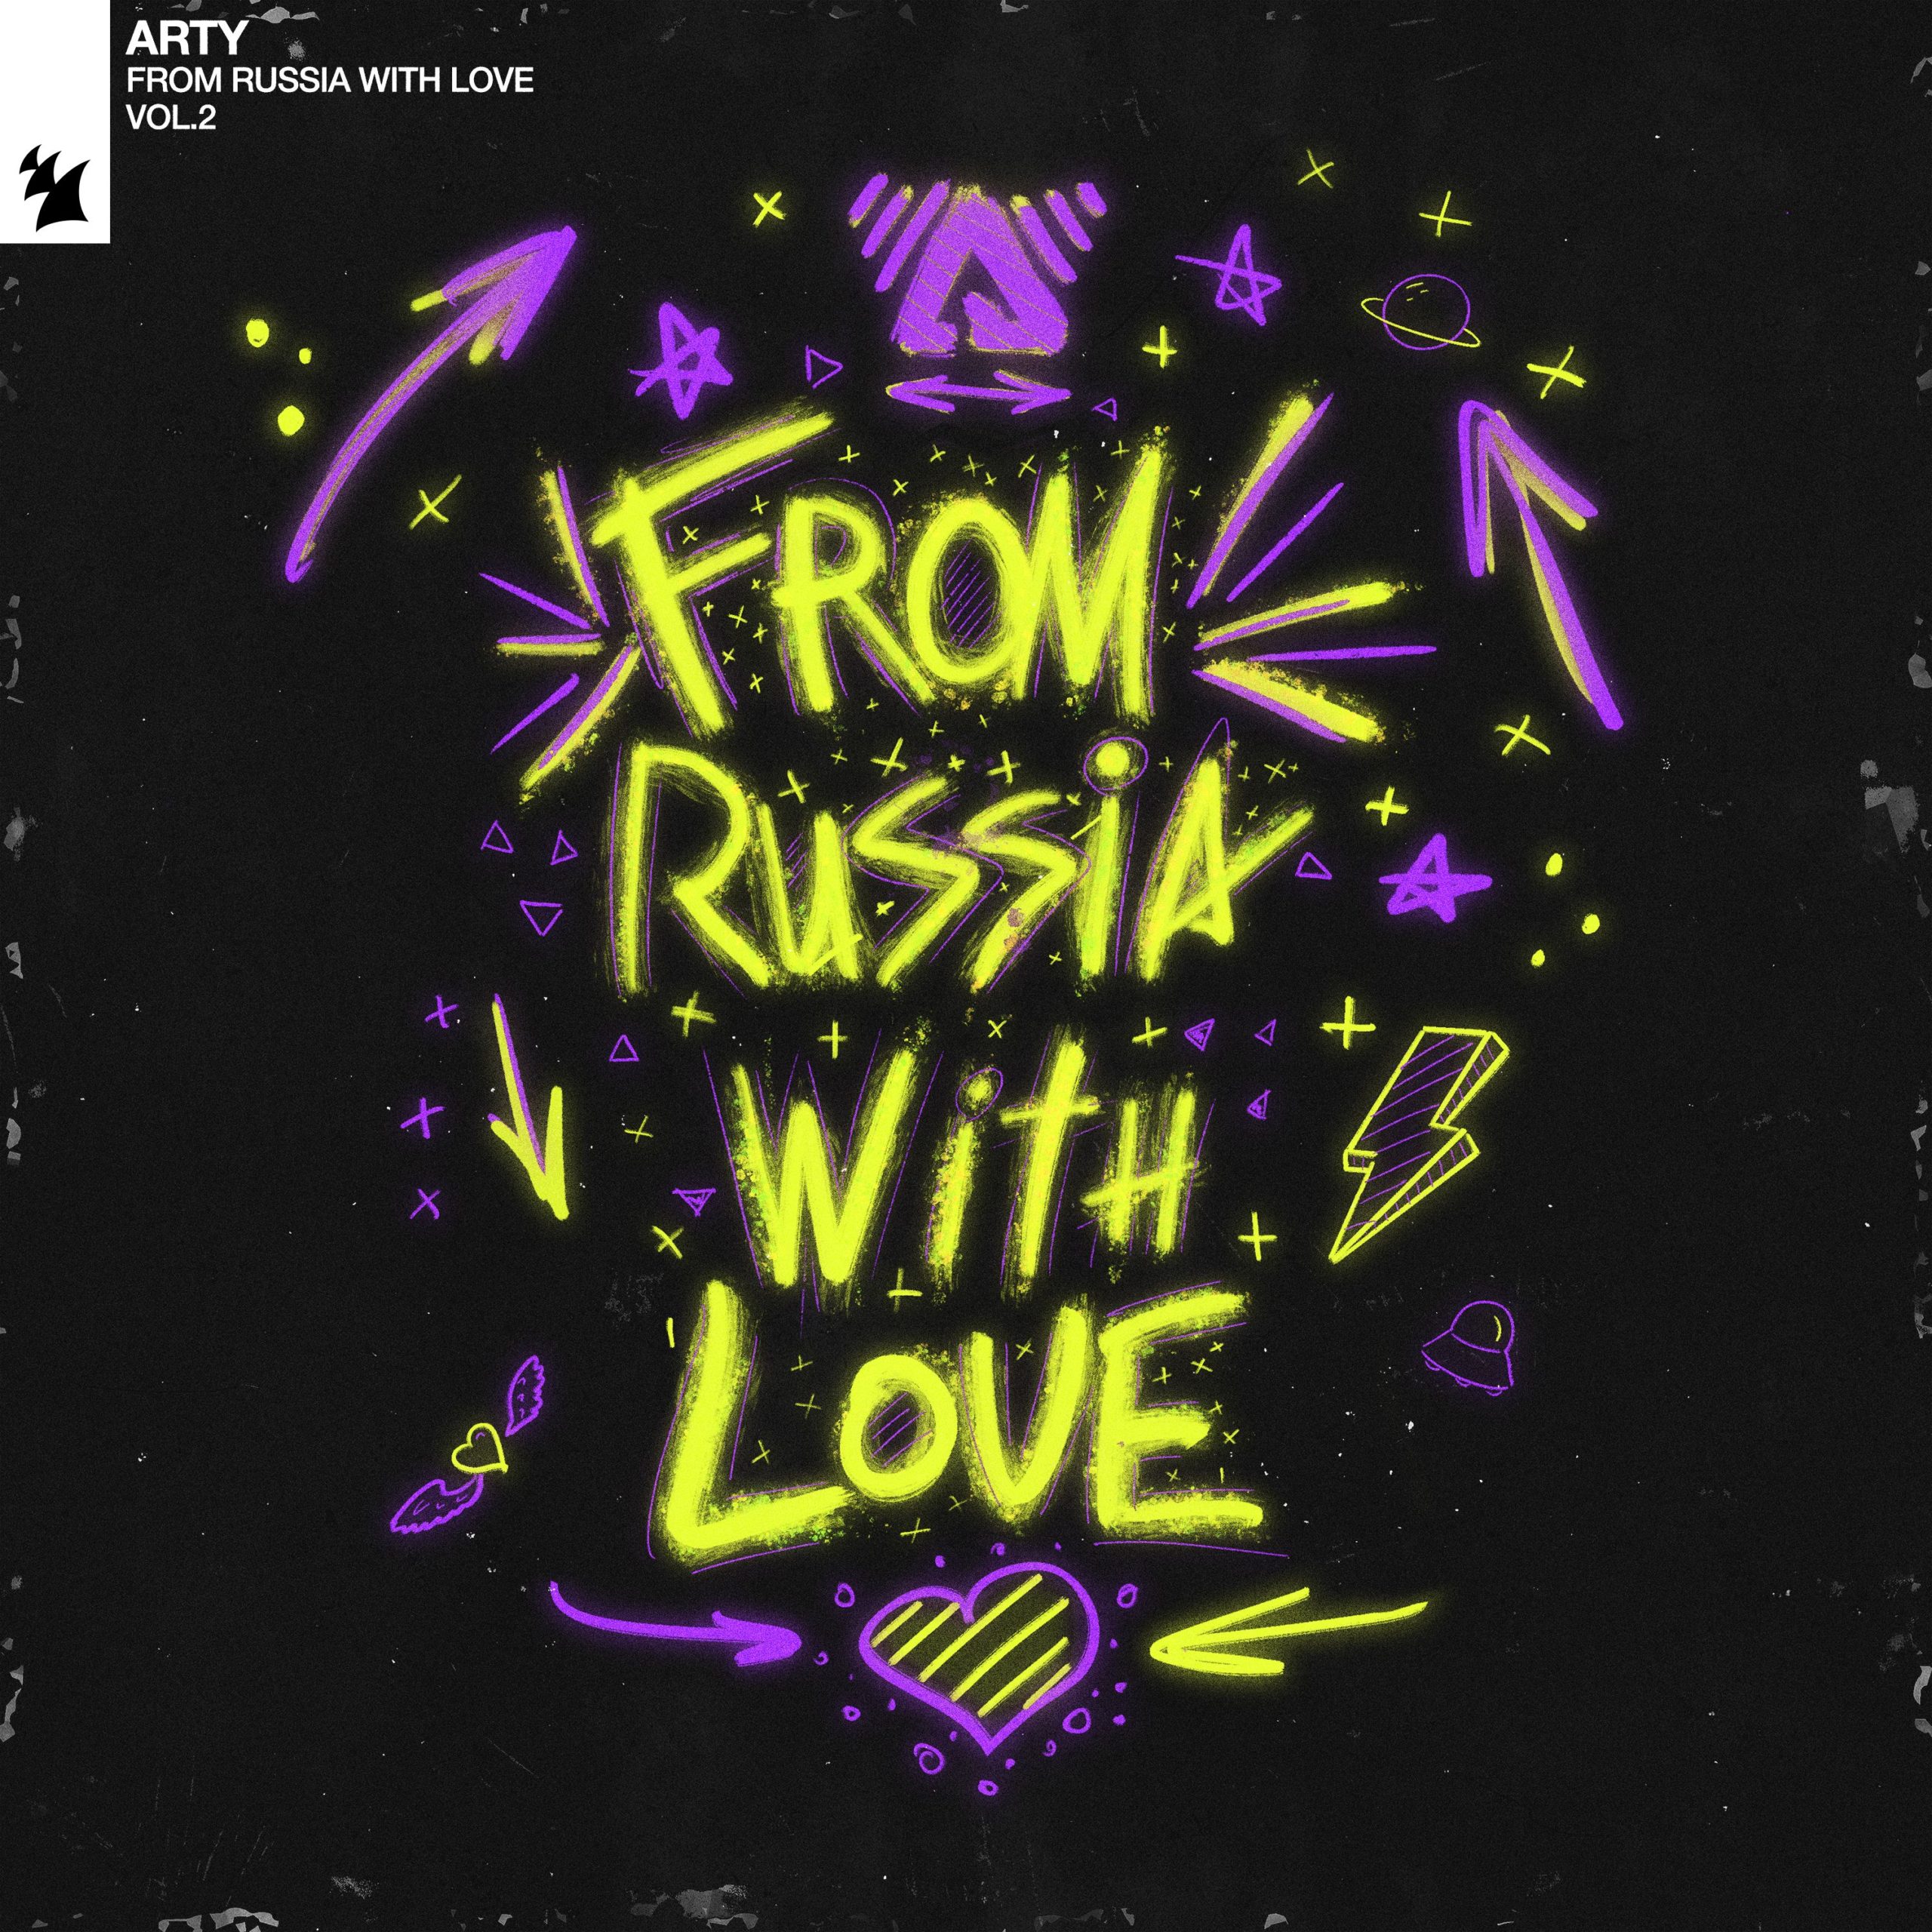 ARTY presents From Russia With Love volume 2 on Armada Music